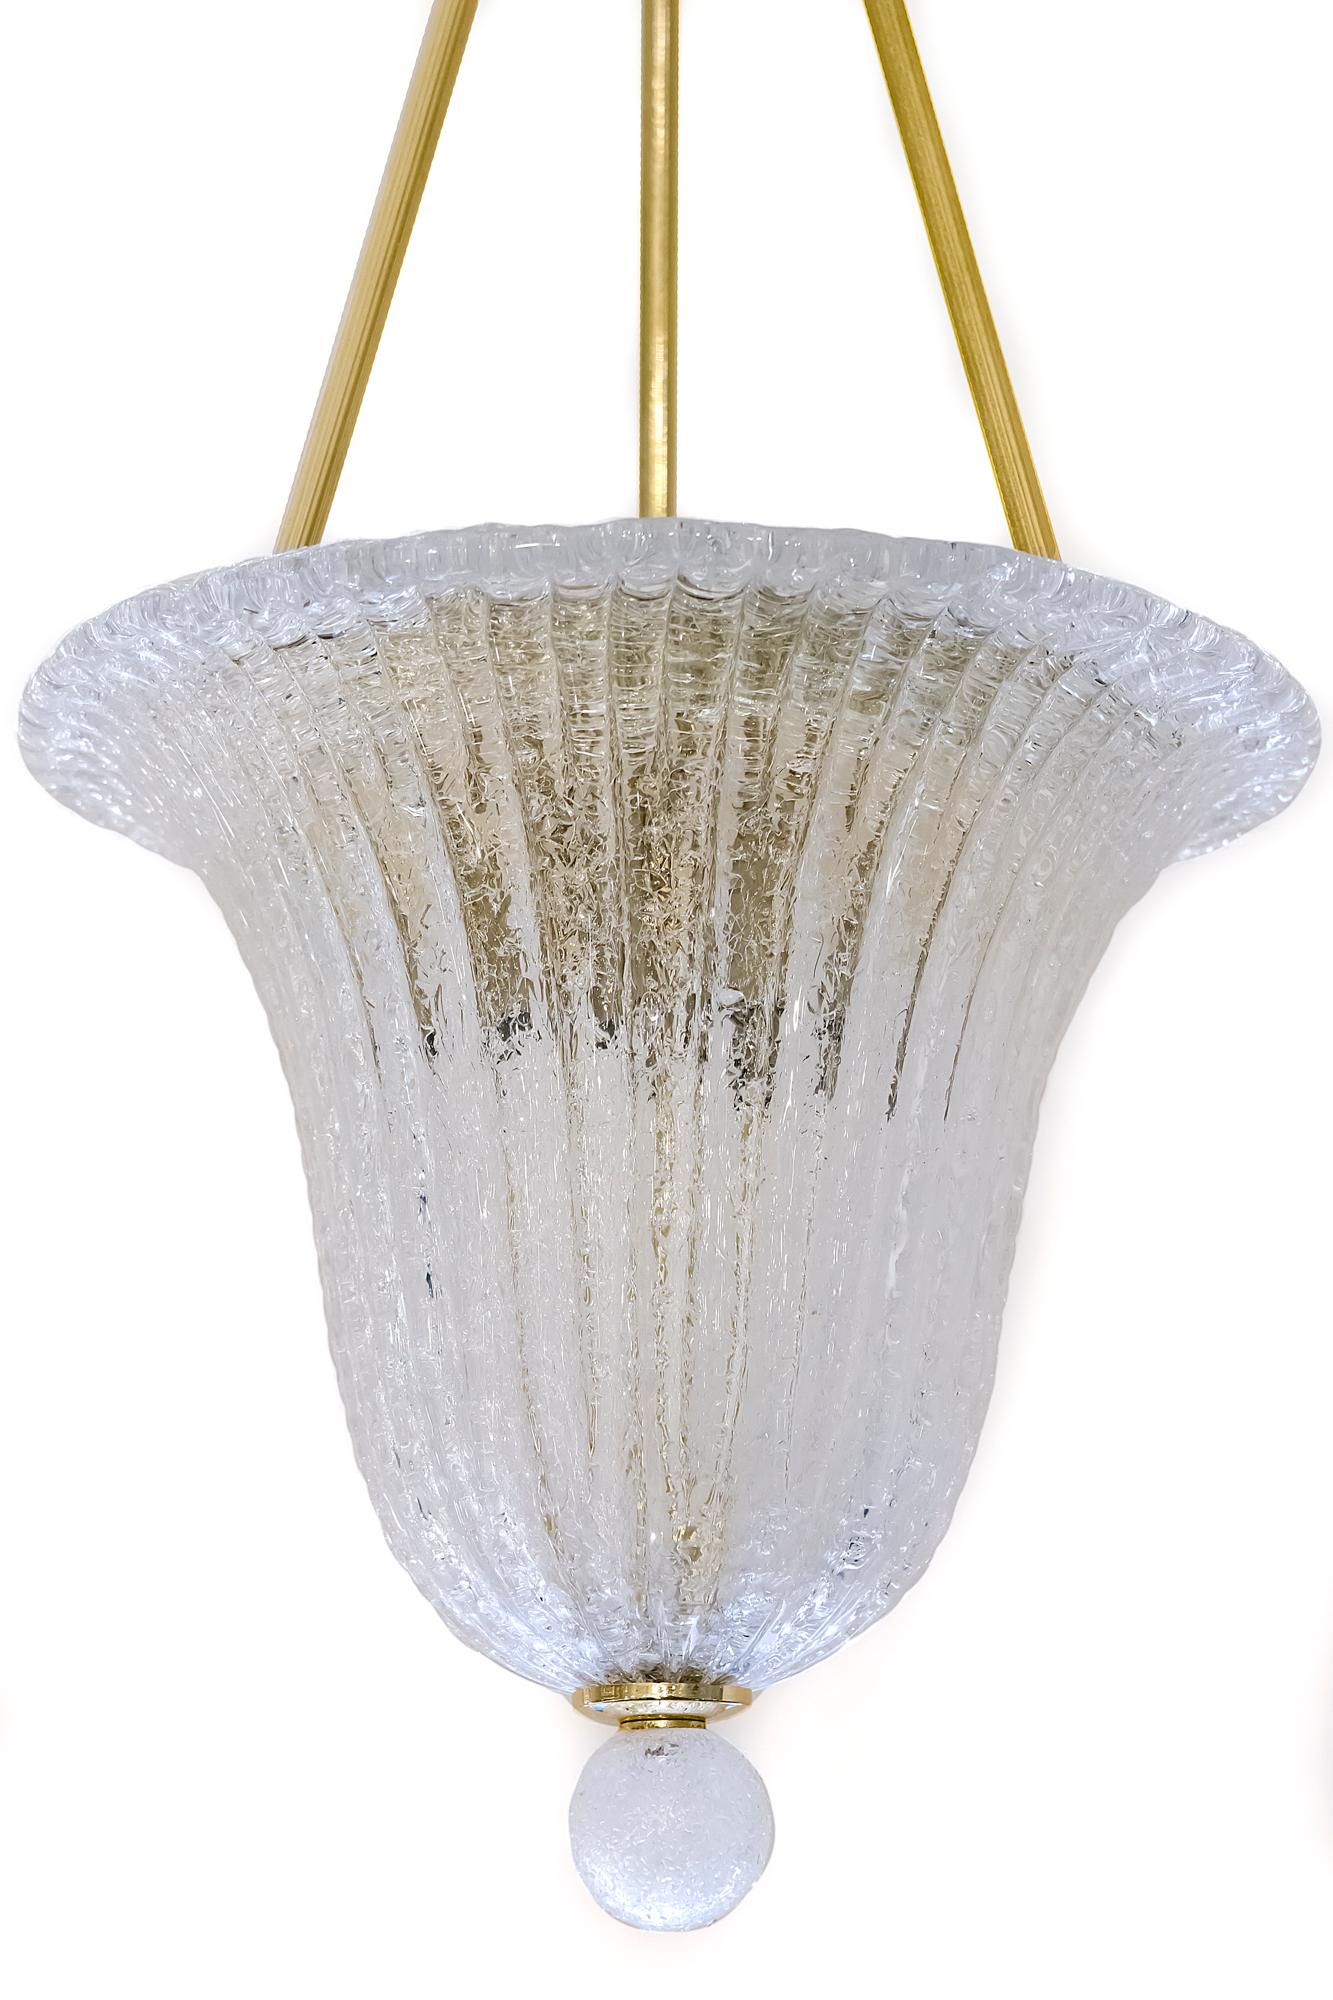 Italian chandelier lantern is made of brass with Murano glass shade.
This chandelier includes 3 pieces. E14 bulbs that lights down.

It is in a very good original vintage condition.
 
 